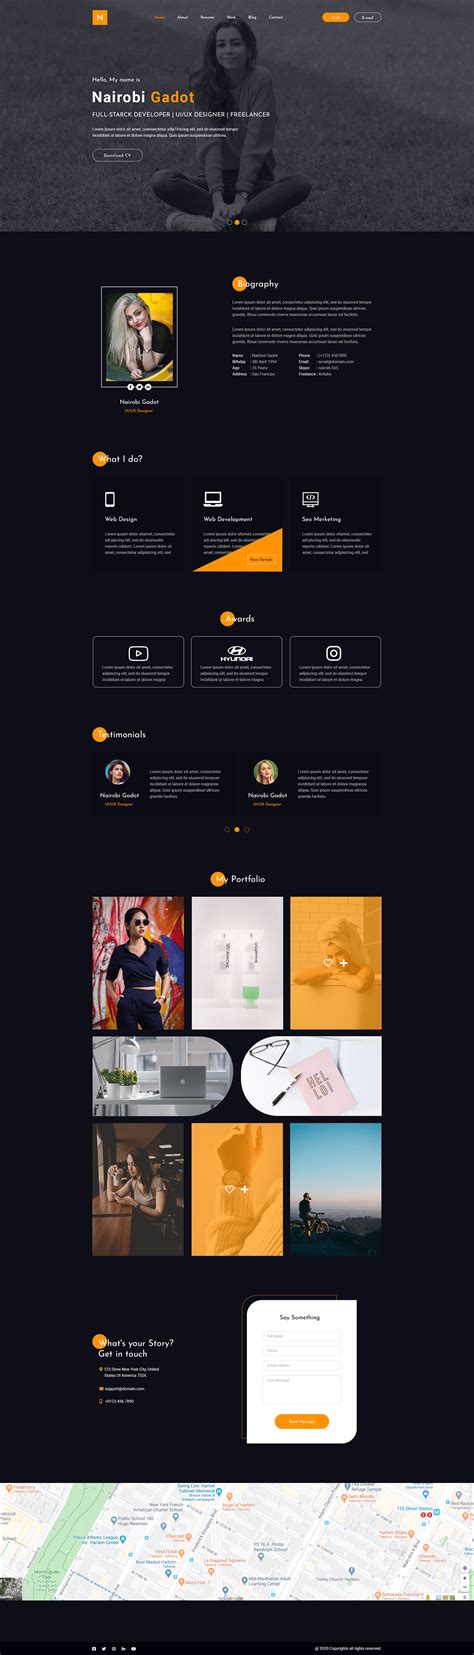 Personal Web Page Design On Behance